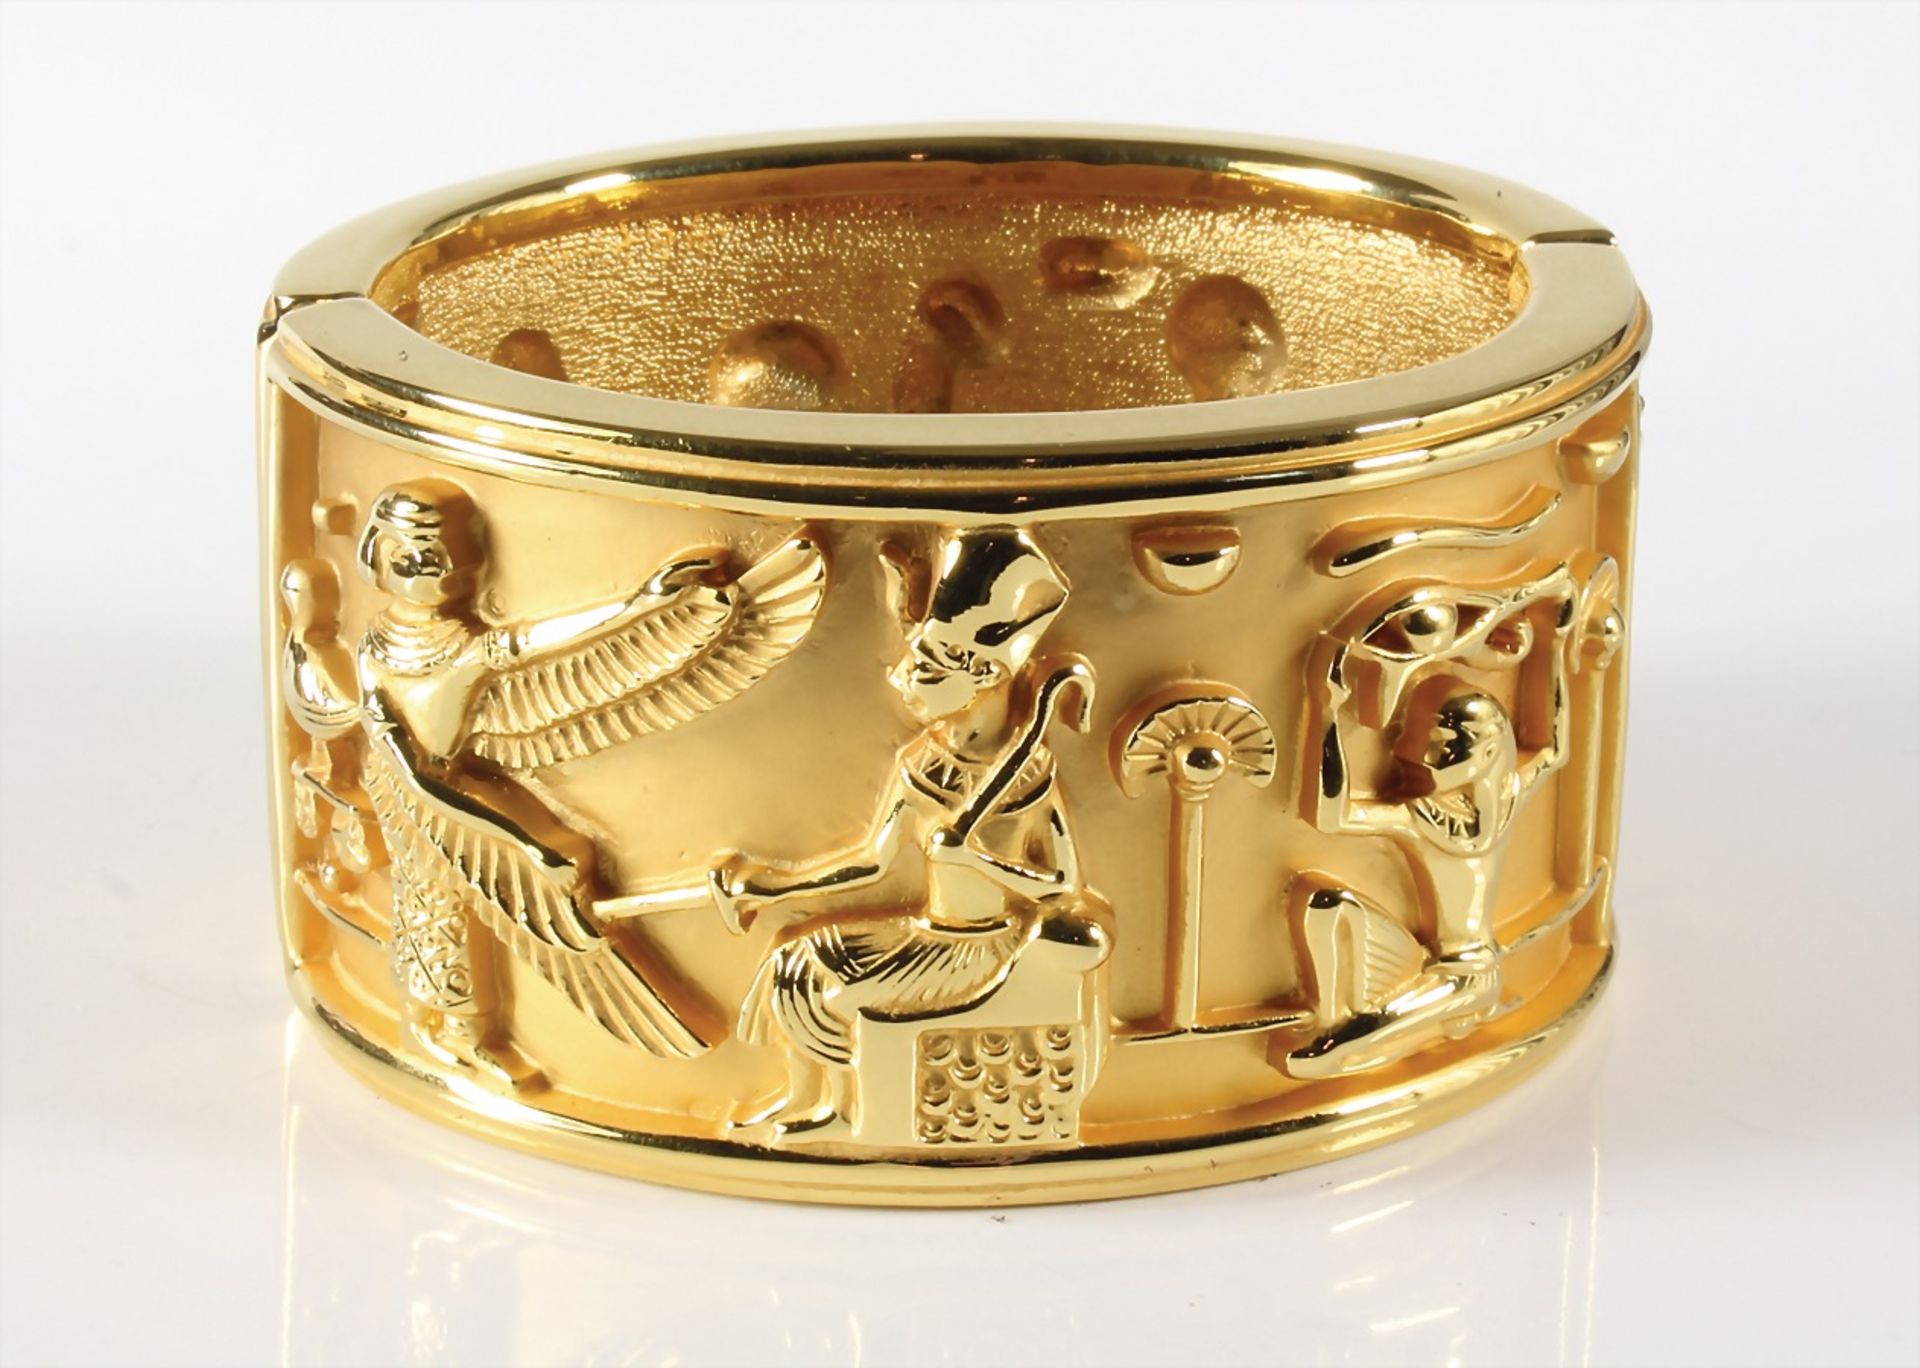 massive Egyptian bangle by "ELISABETH TAYLOR for AVON" (signed), gold colored, relieflike,